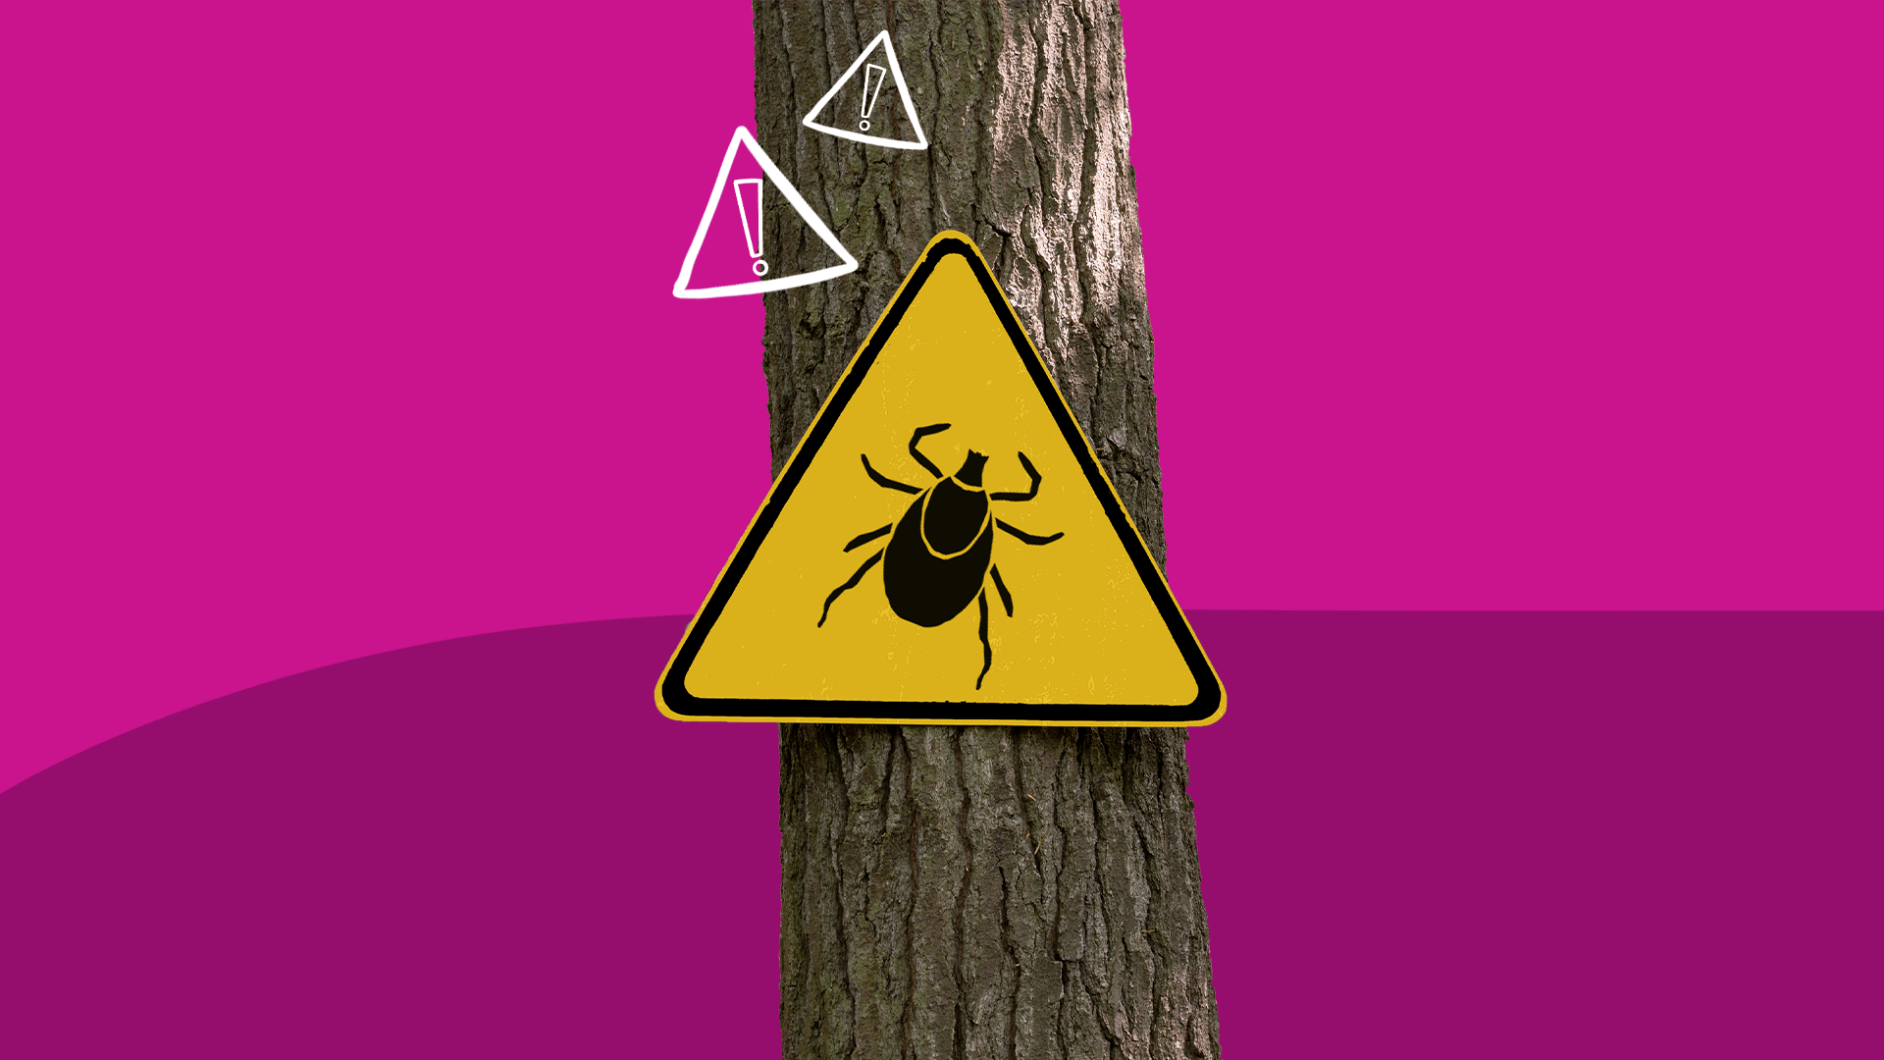 A tick on a warning sign represents Lyme disease symptoms